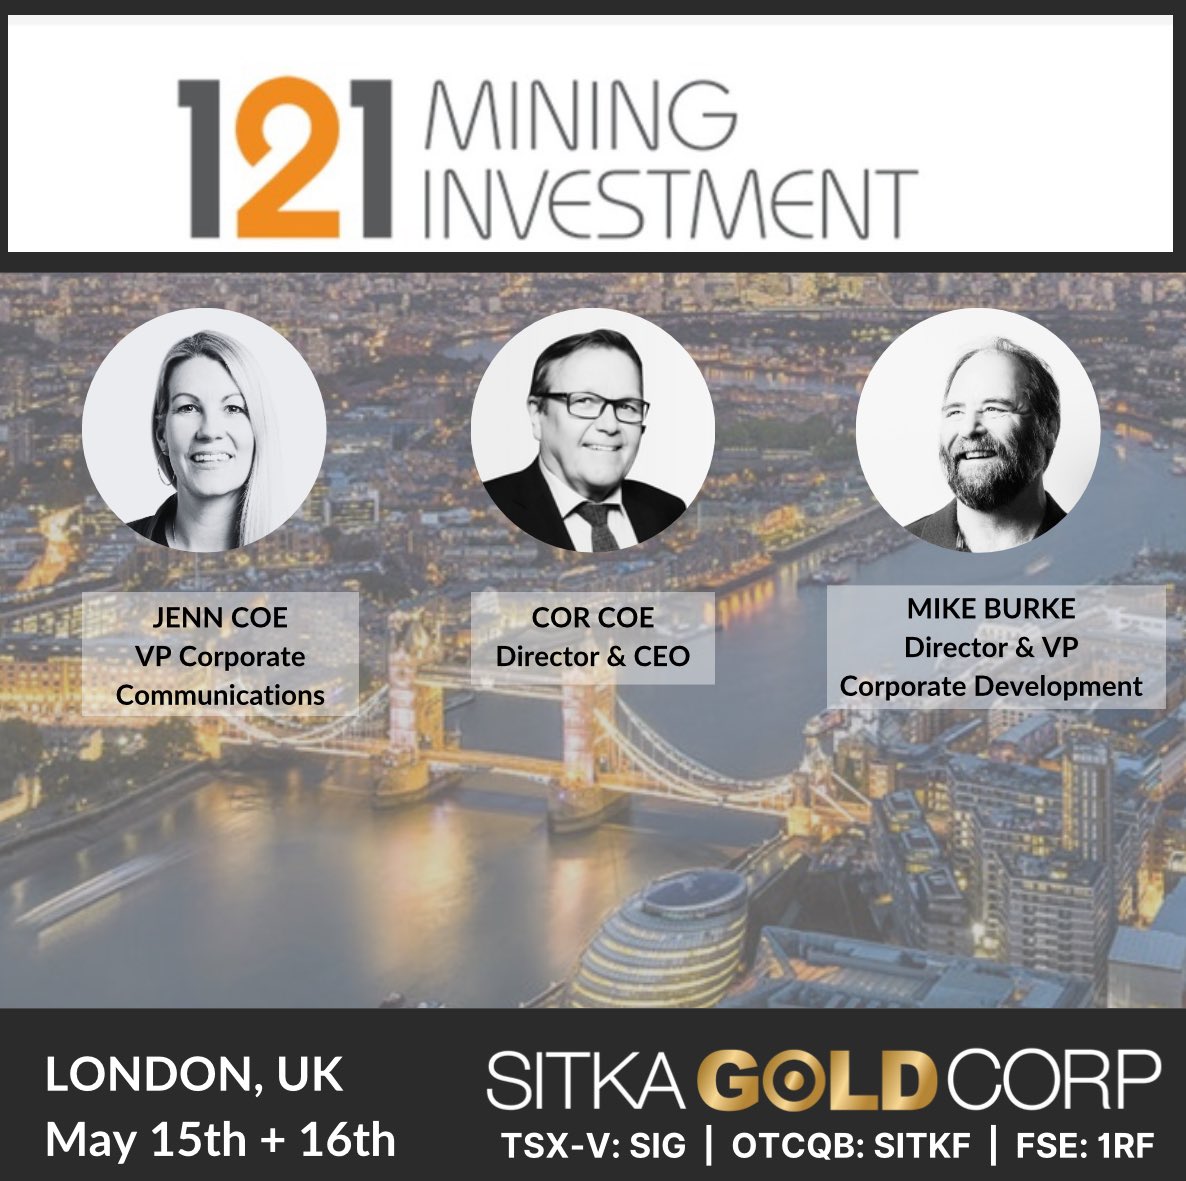 @SitkaGoldCorp will be attending the 121 Mining Investment Conference in London this week. Email info@sitkagoldcorp.com to set up a meeting while management is in town, or click below to register for the event: tinyurl.com/32eea6da $SIG $SITKF #gold #silver #copper